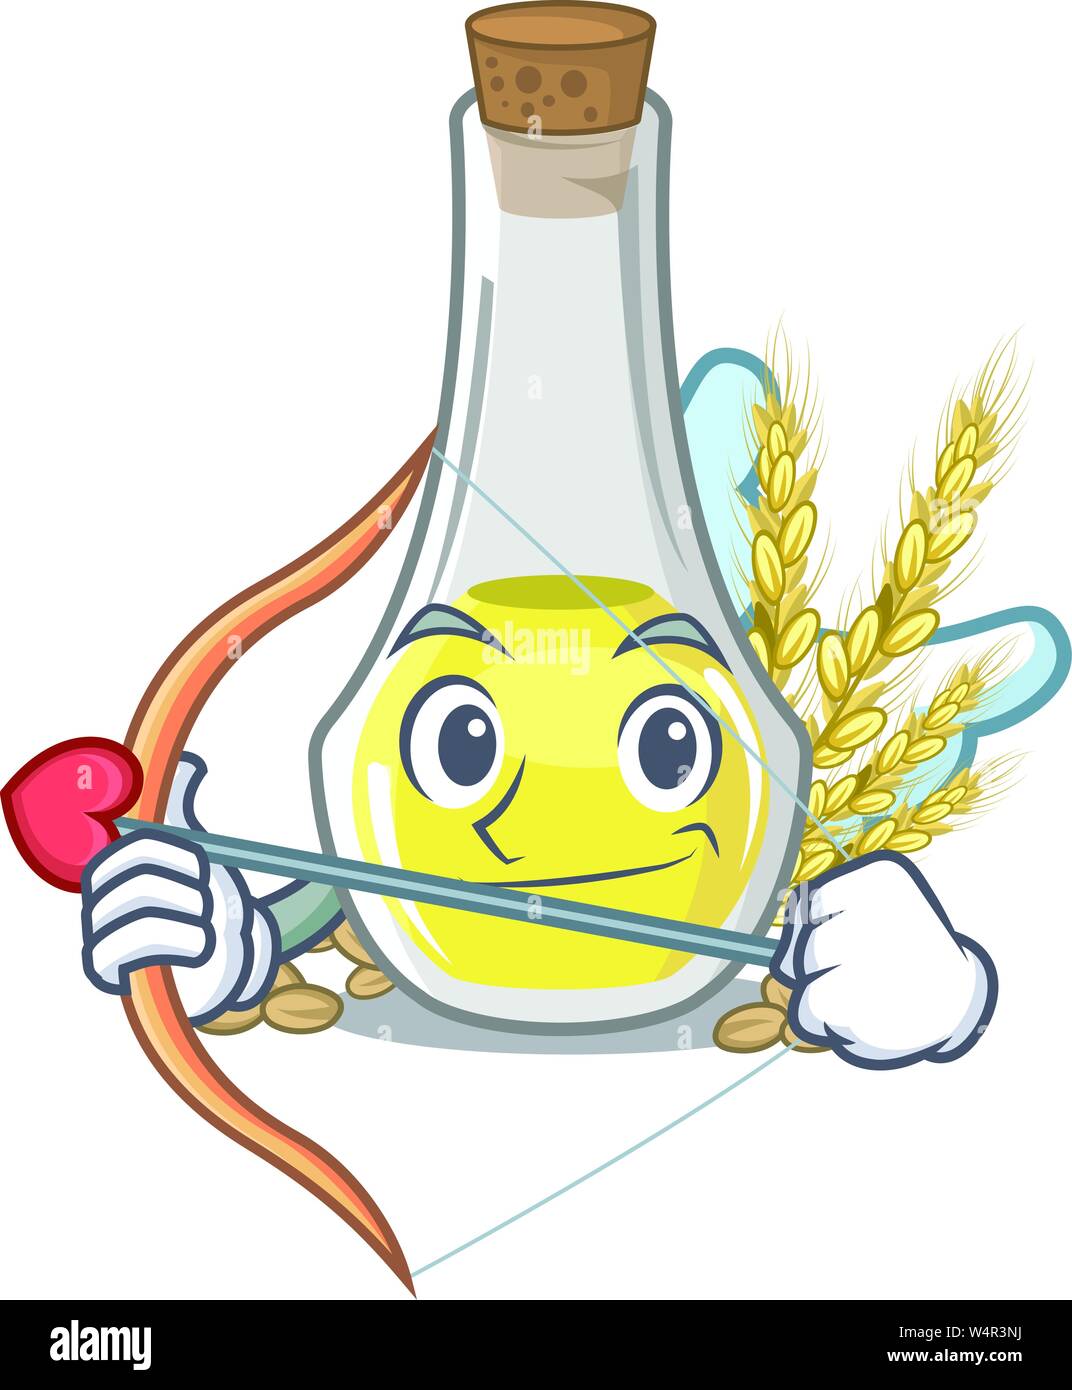 Cupid wheat germ oil with isolated character vector illustration Stock Vector